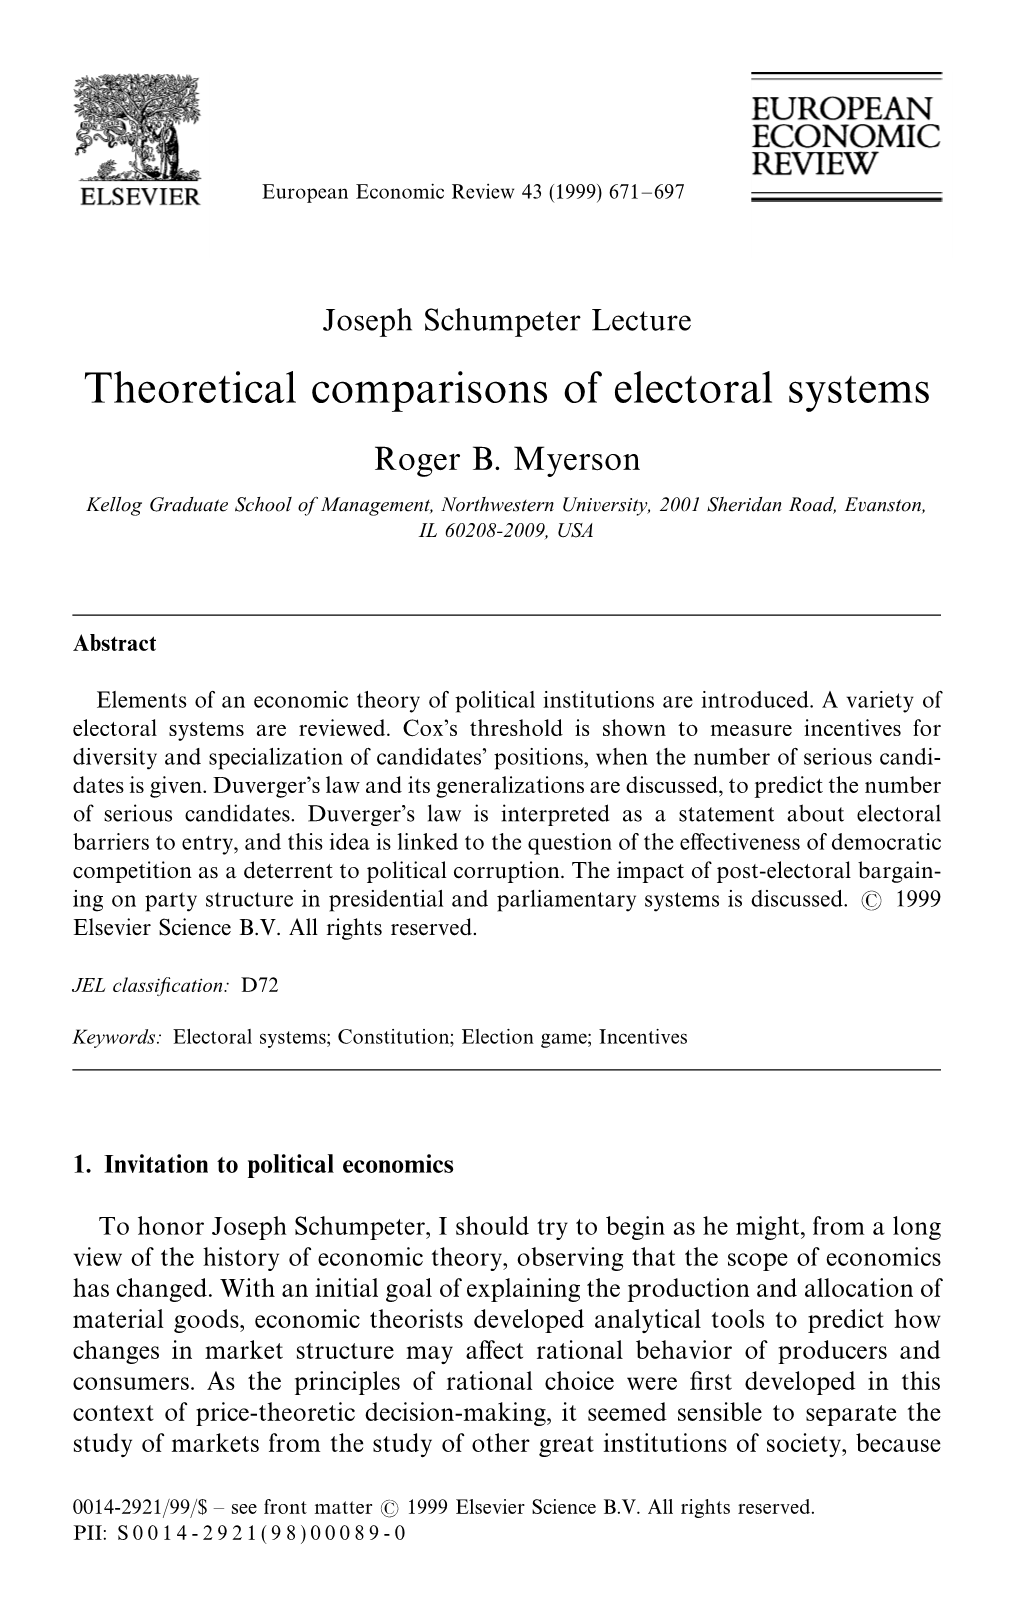 Theoretical Comparisons of Electoral Systems Roger B